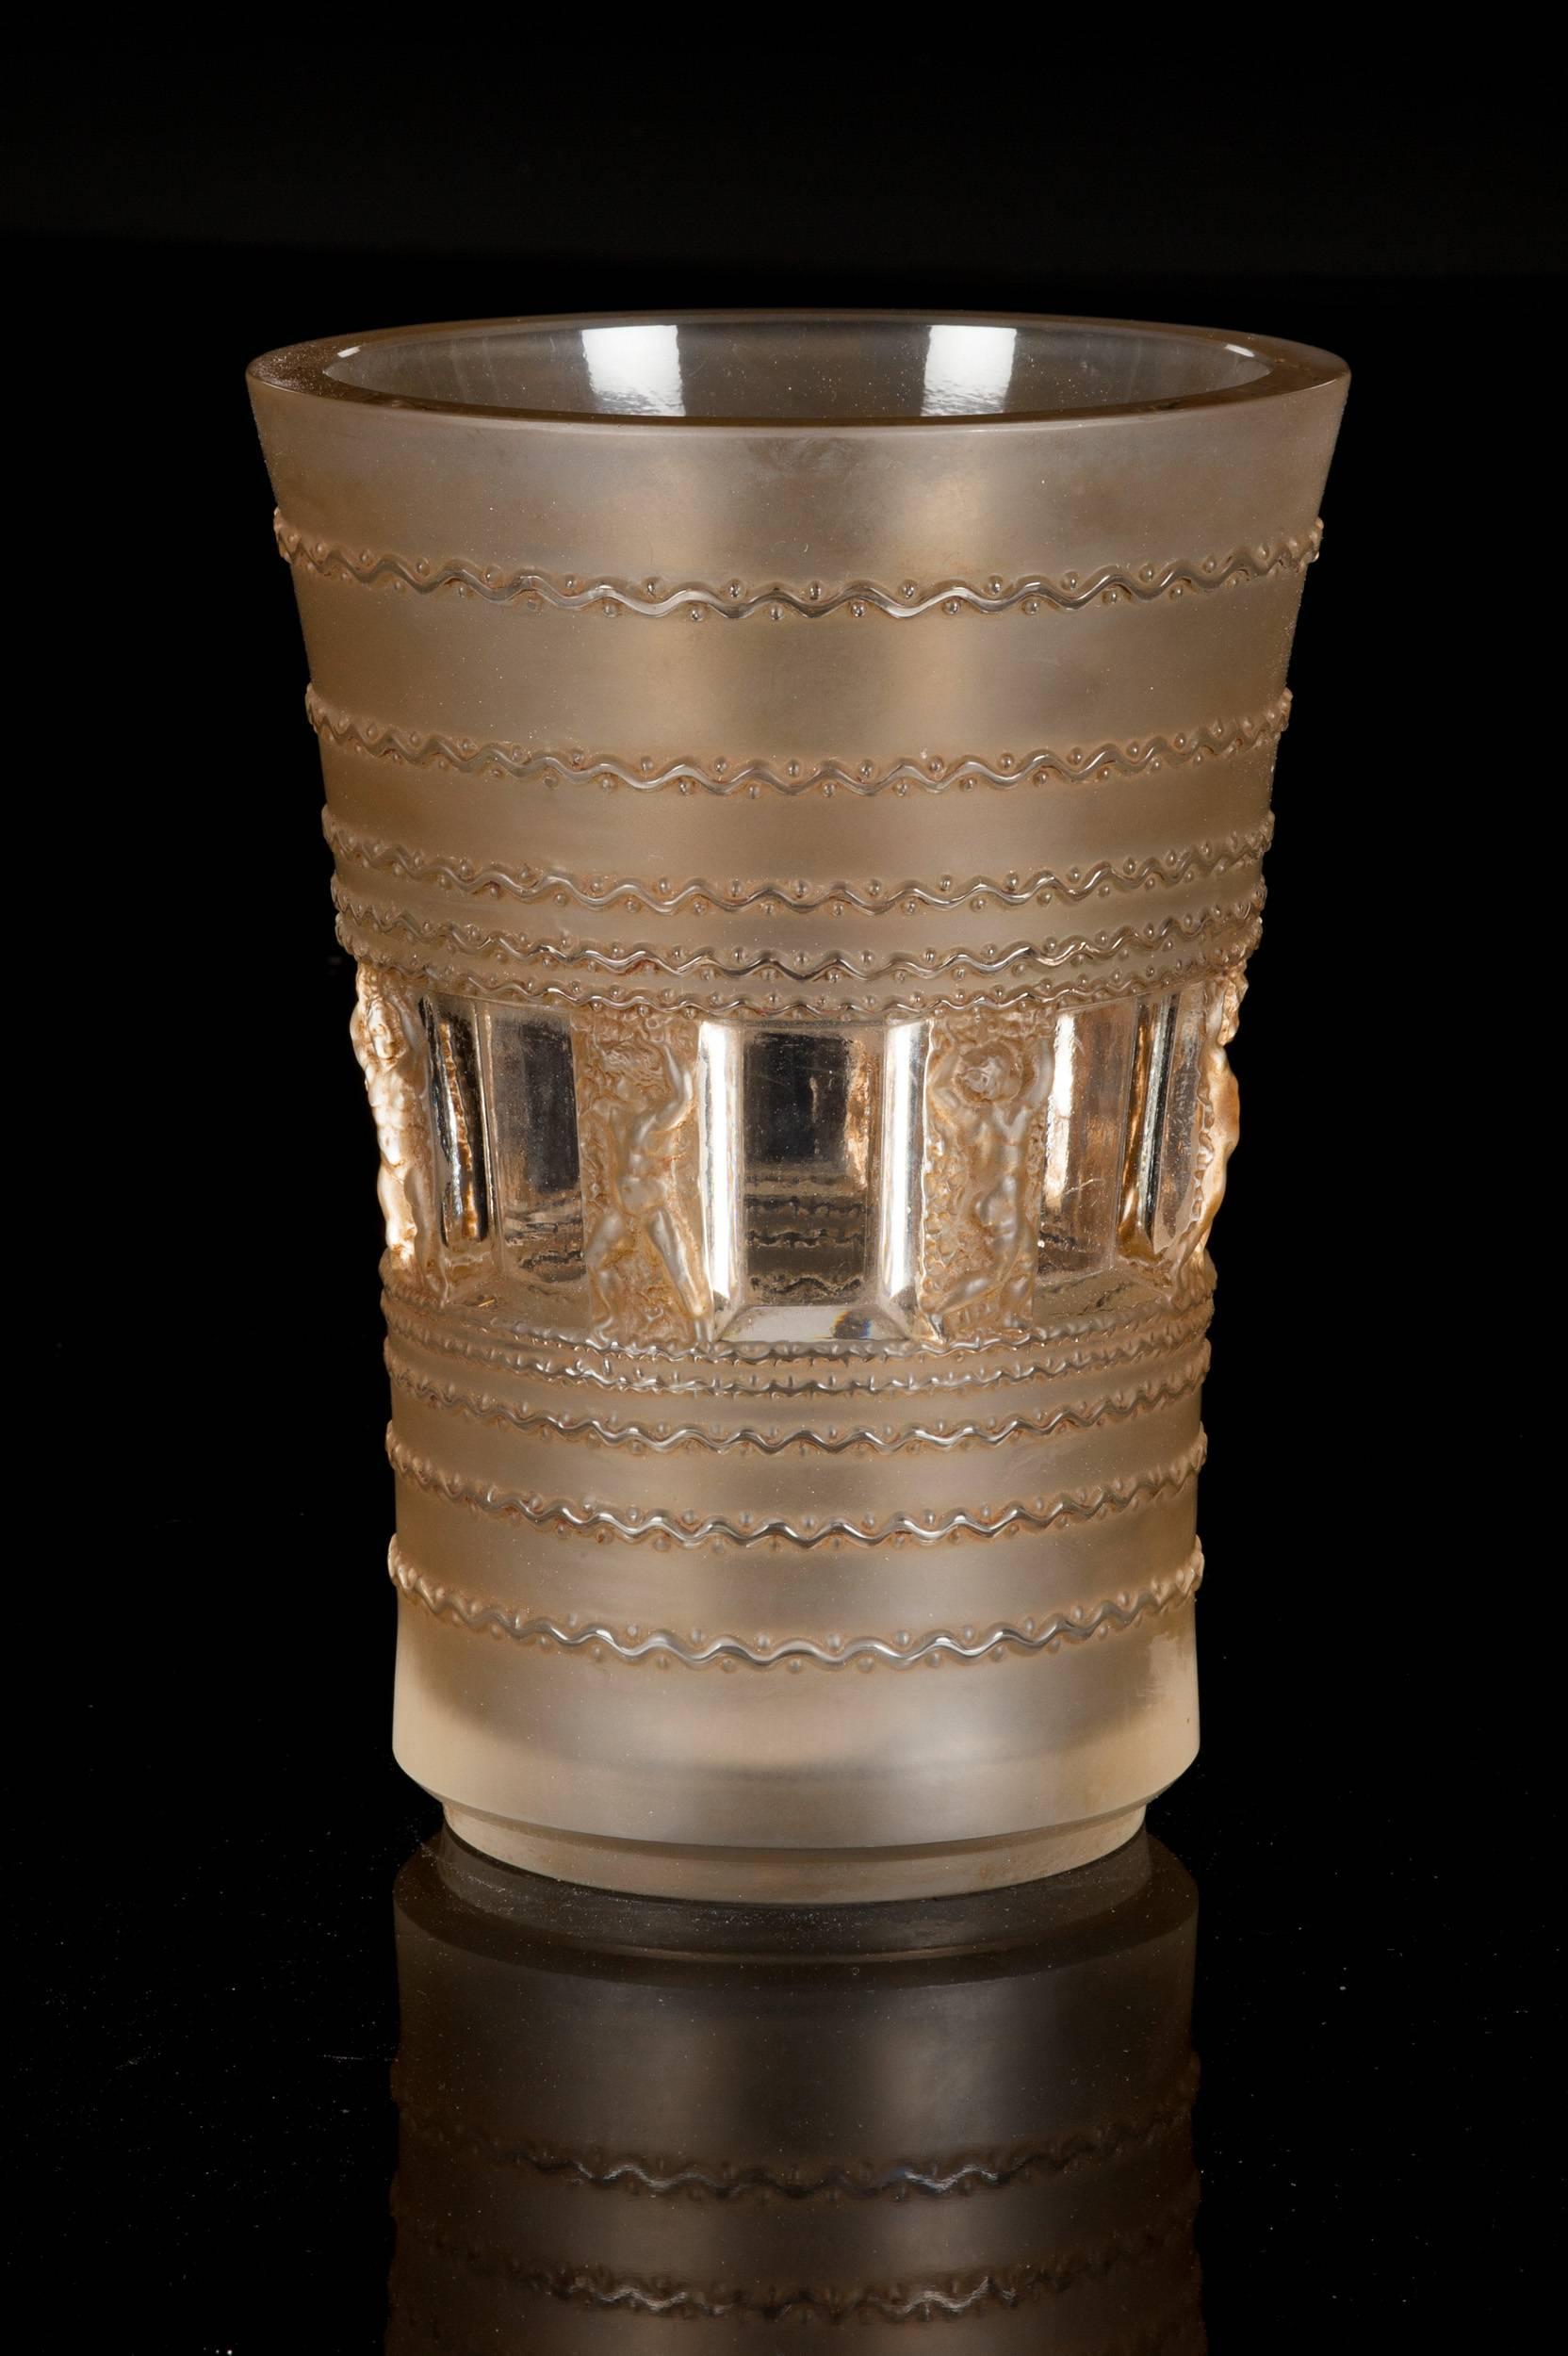 Florence vase.
Frosted and polished glass, highlighted with sepia staining designed on 28 April 1937, partially frosted clear glass with sepia patina,
sandblasted signature R. Lalique, France.
Measure: Height 20 cm.

Literature: F. Marcilhac,